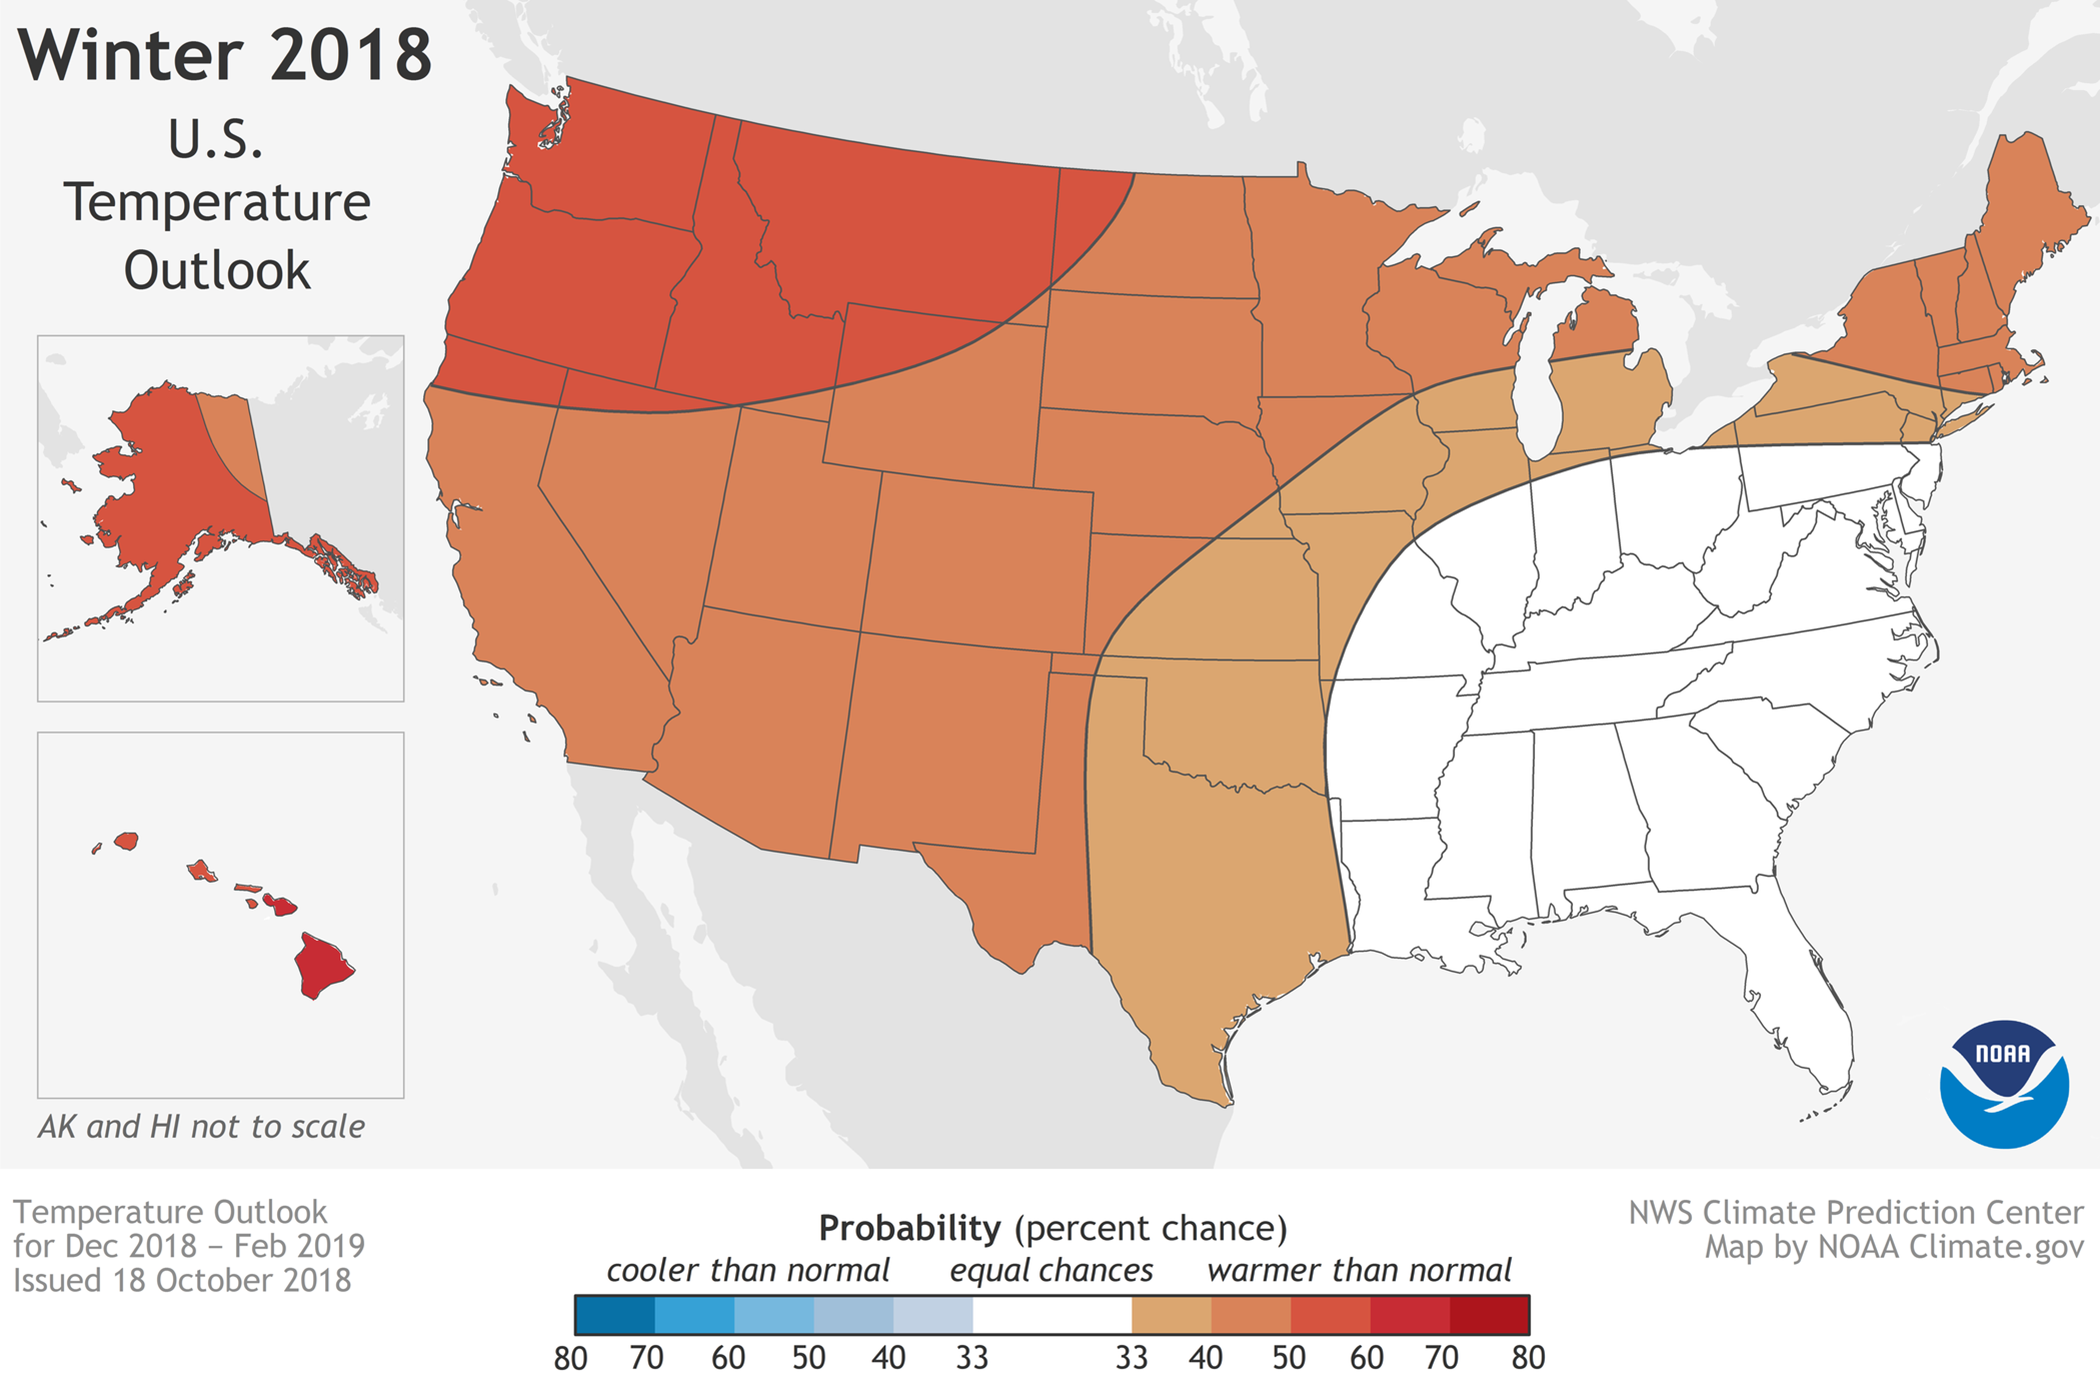 Winter Outlook favors warmer temperatures for much of U.S. National